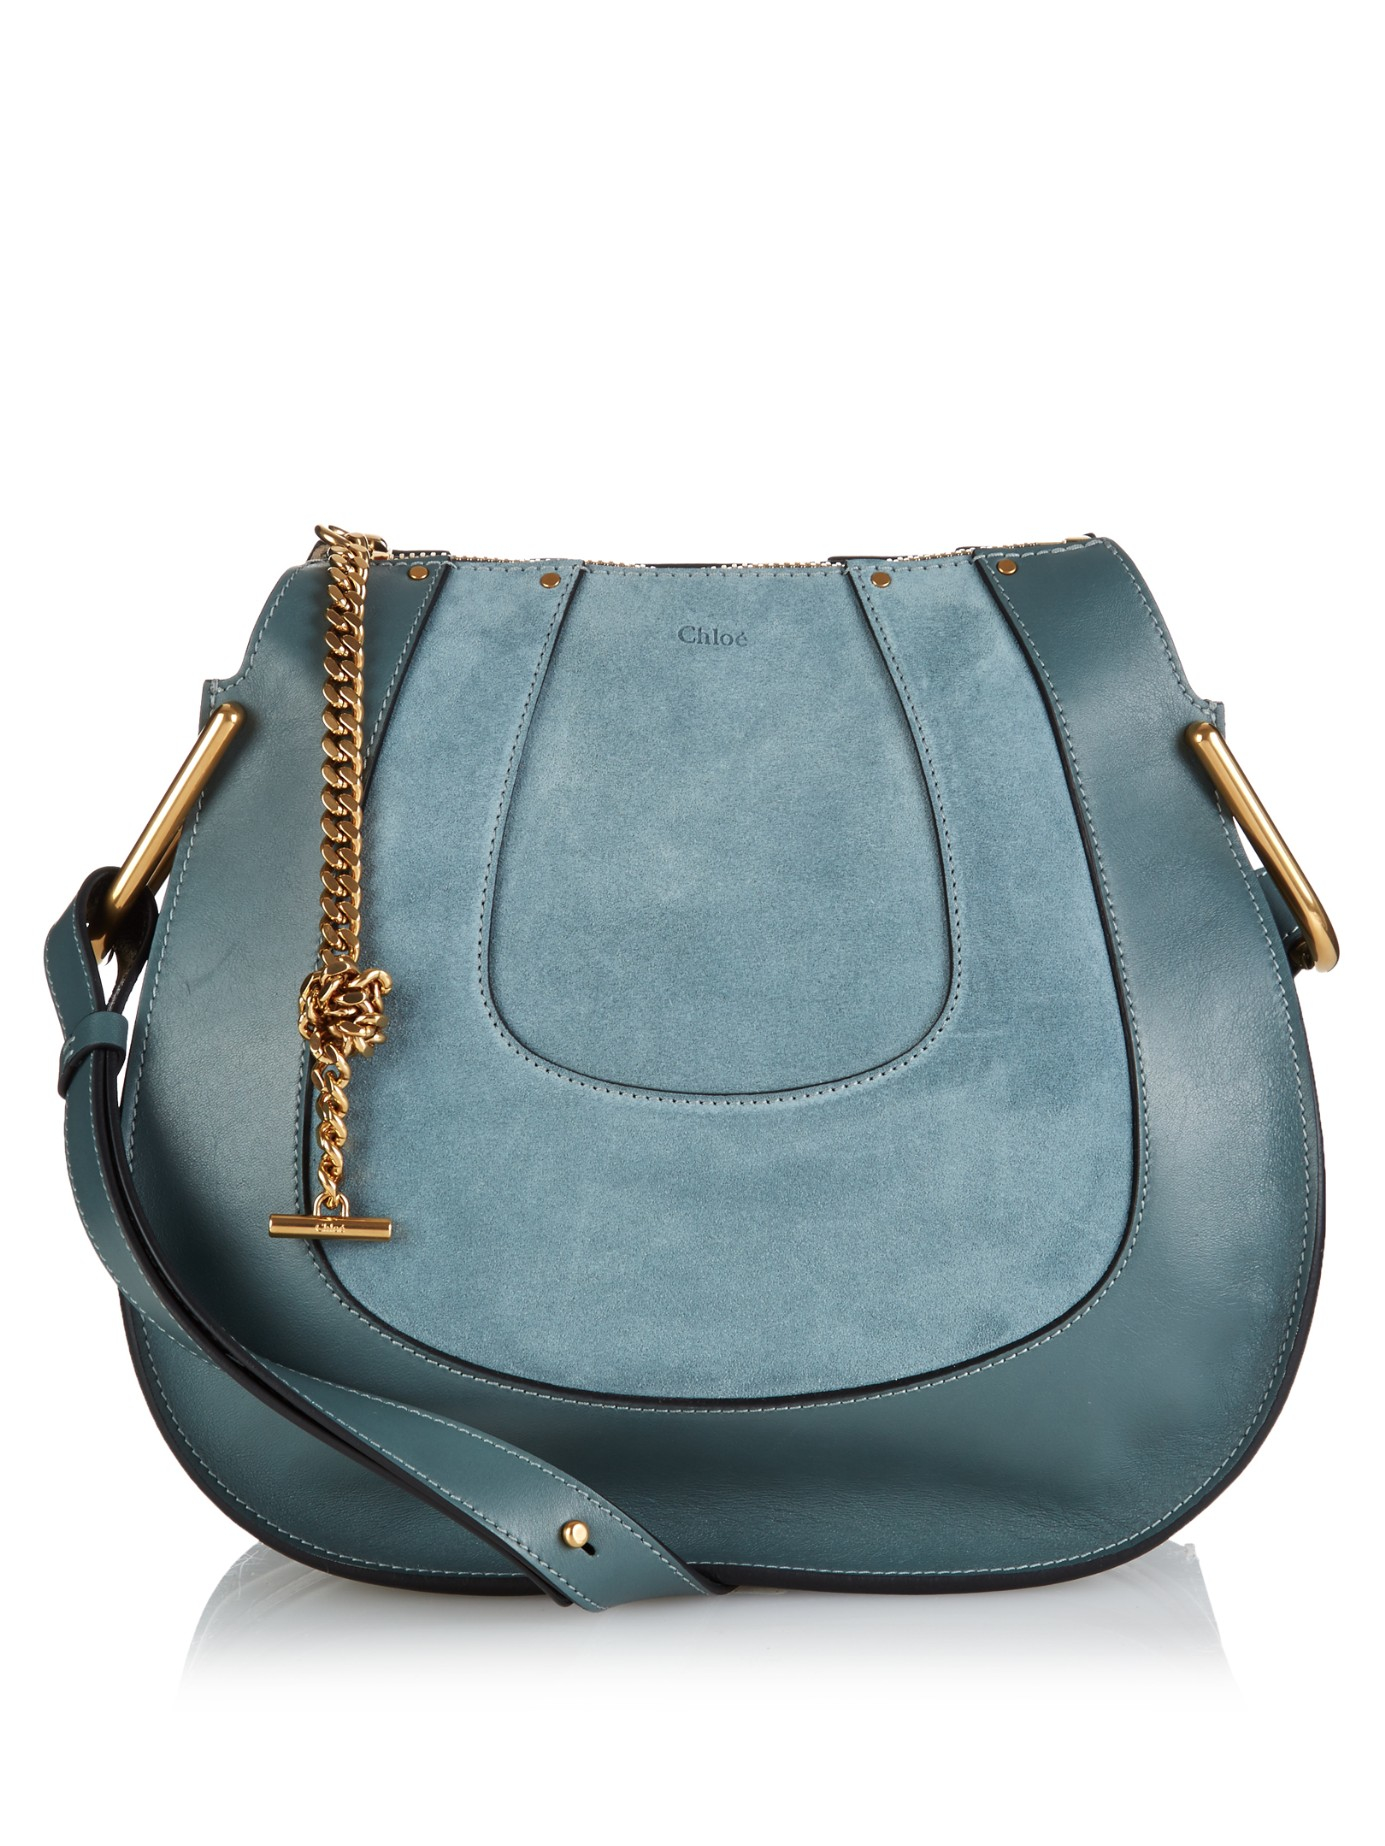 Chlo Hayley Small Suede And Leather Shoulder Bag in Blue | Lyst